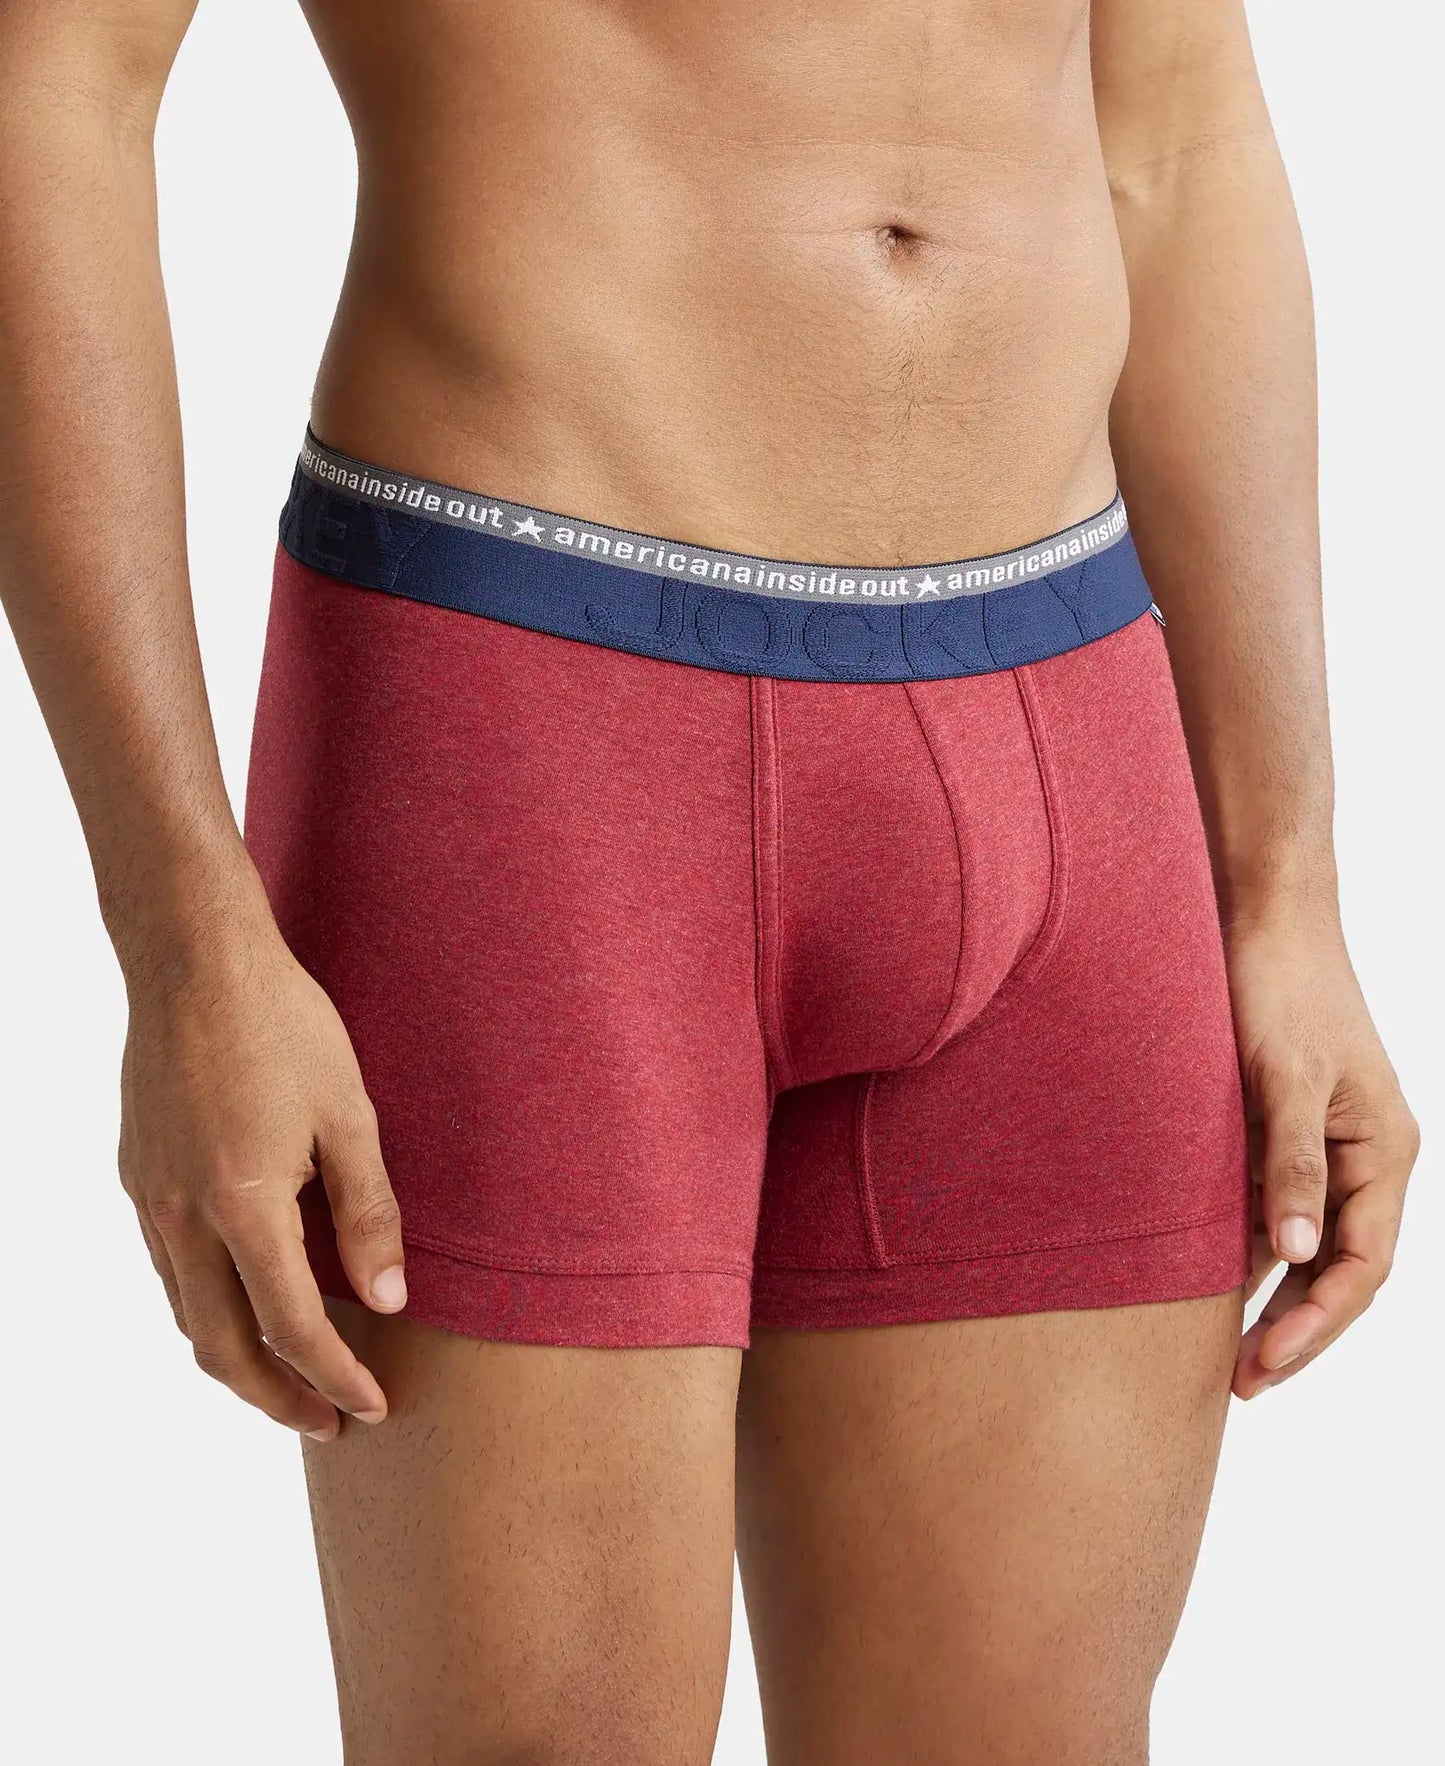 Super Combed Cotton Elastane Solid Trunk with Ultrasoft Waistband - Red Melange-3